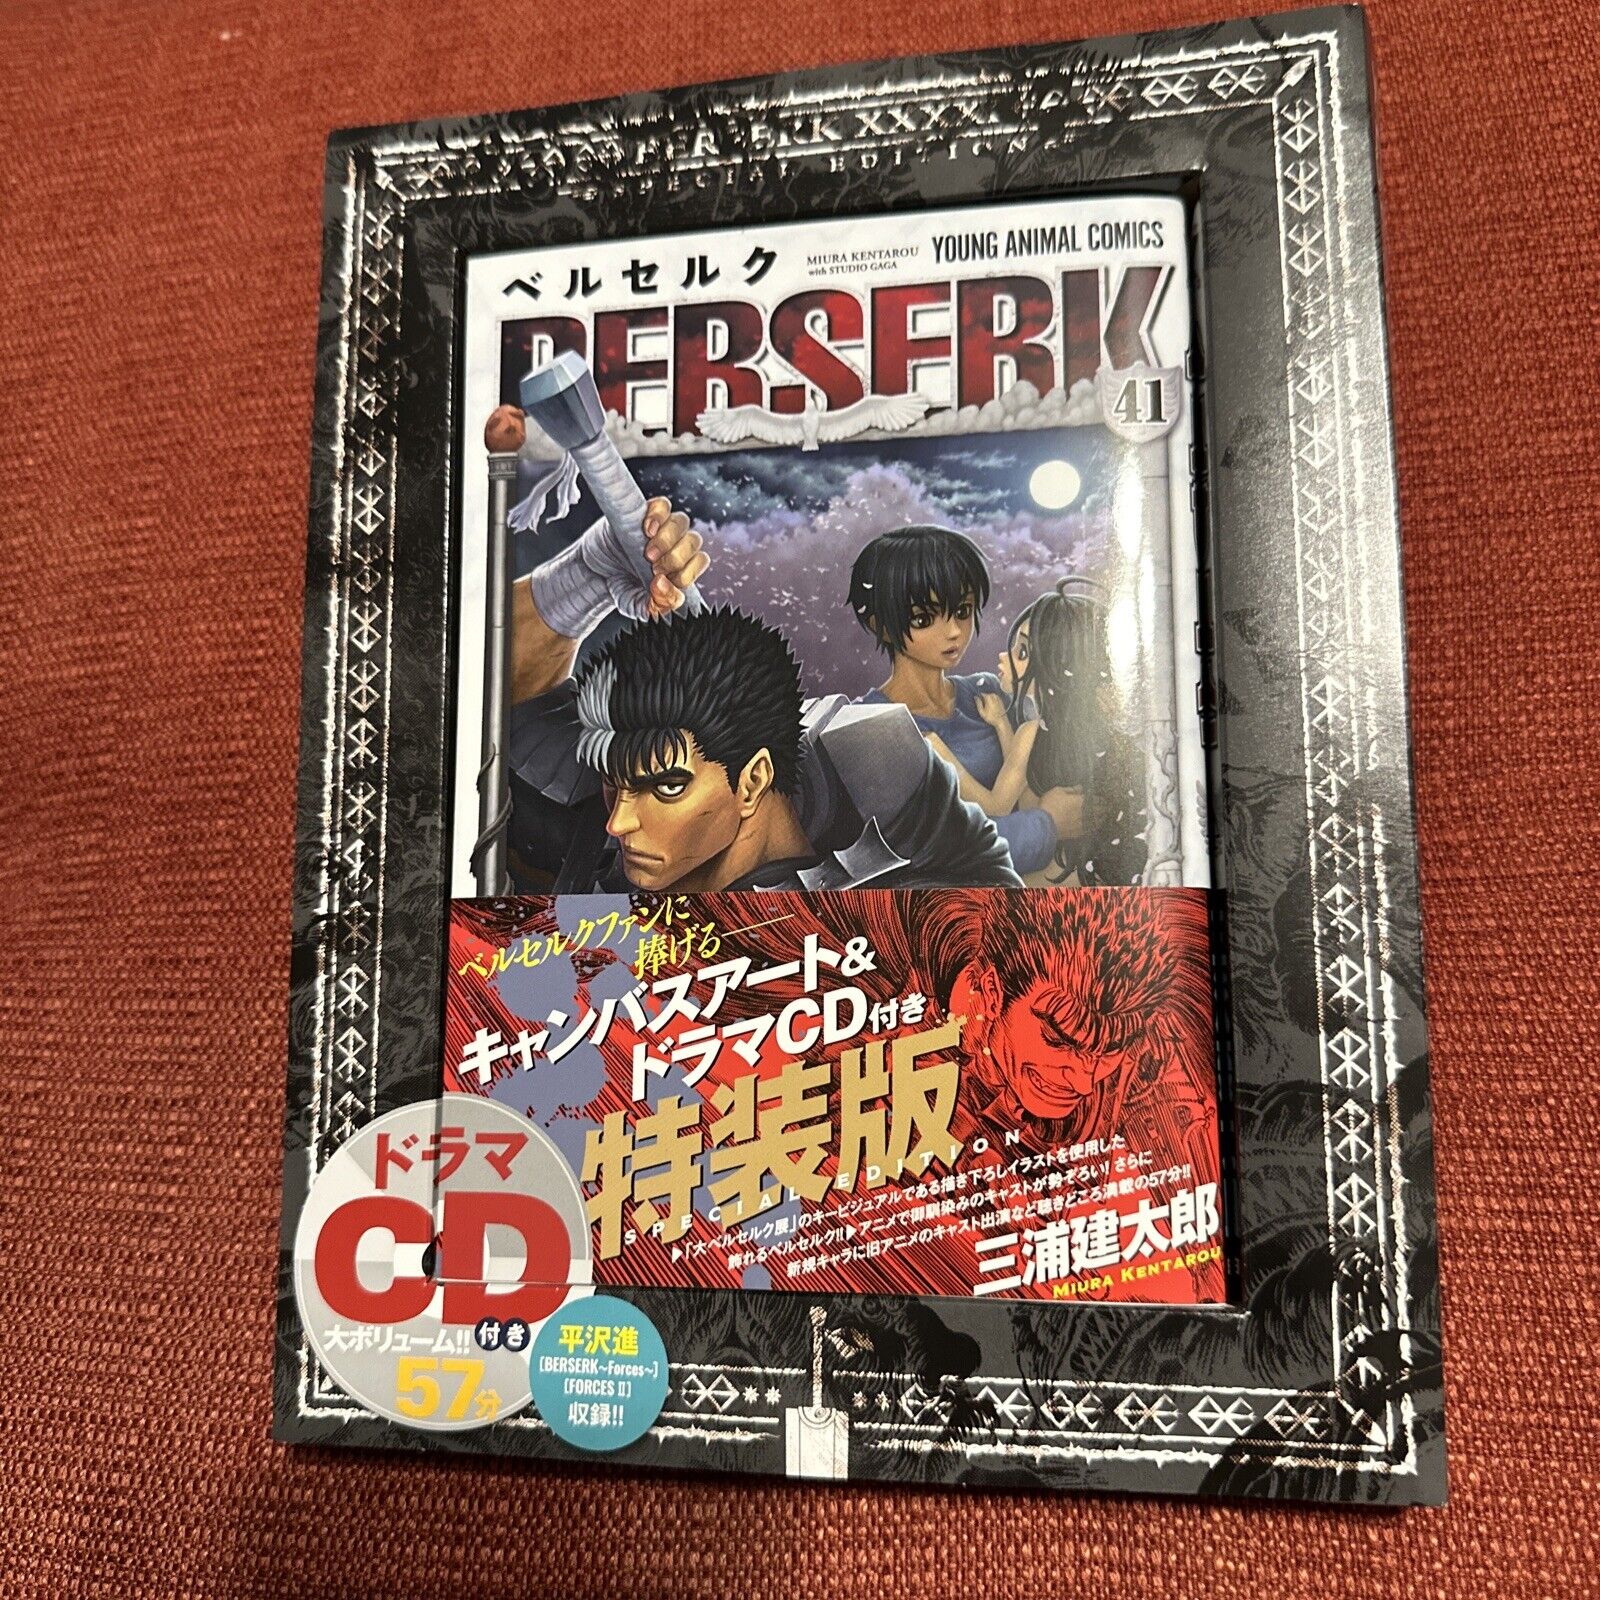 Berserk 41 Special Edition w/ Canvas Artwork and Drama CD (US Seller)